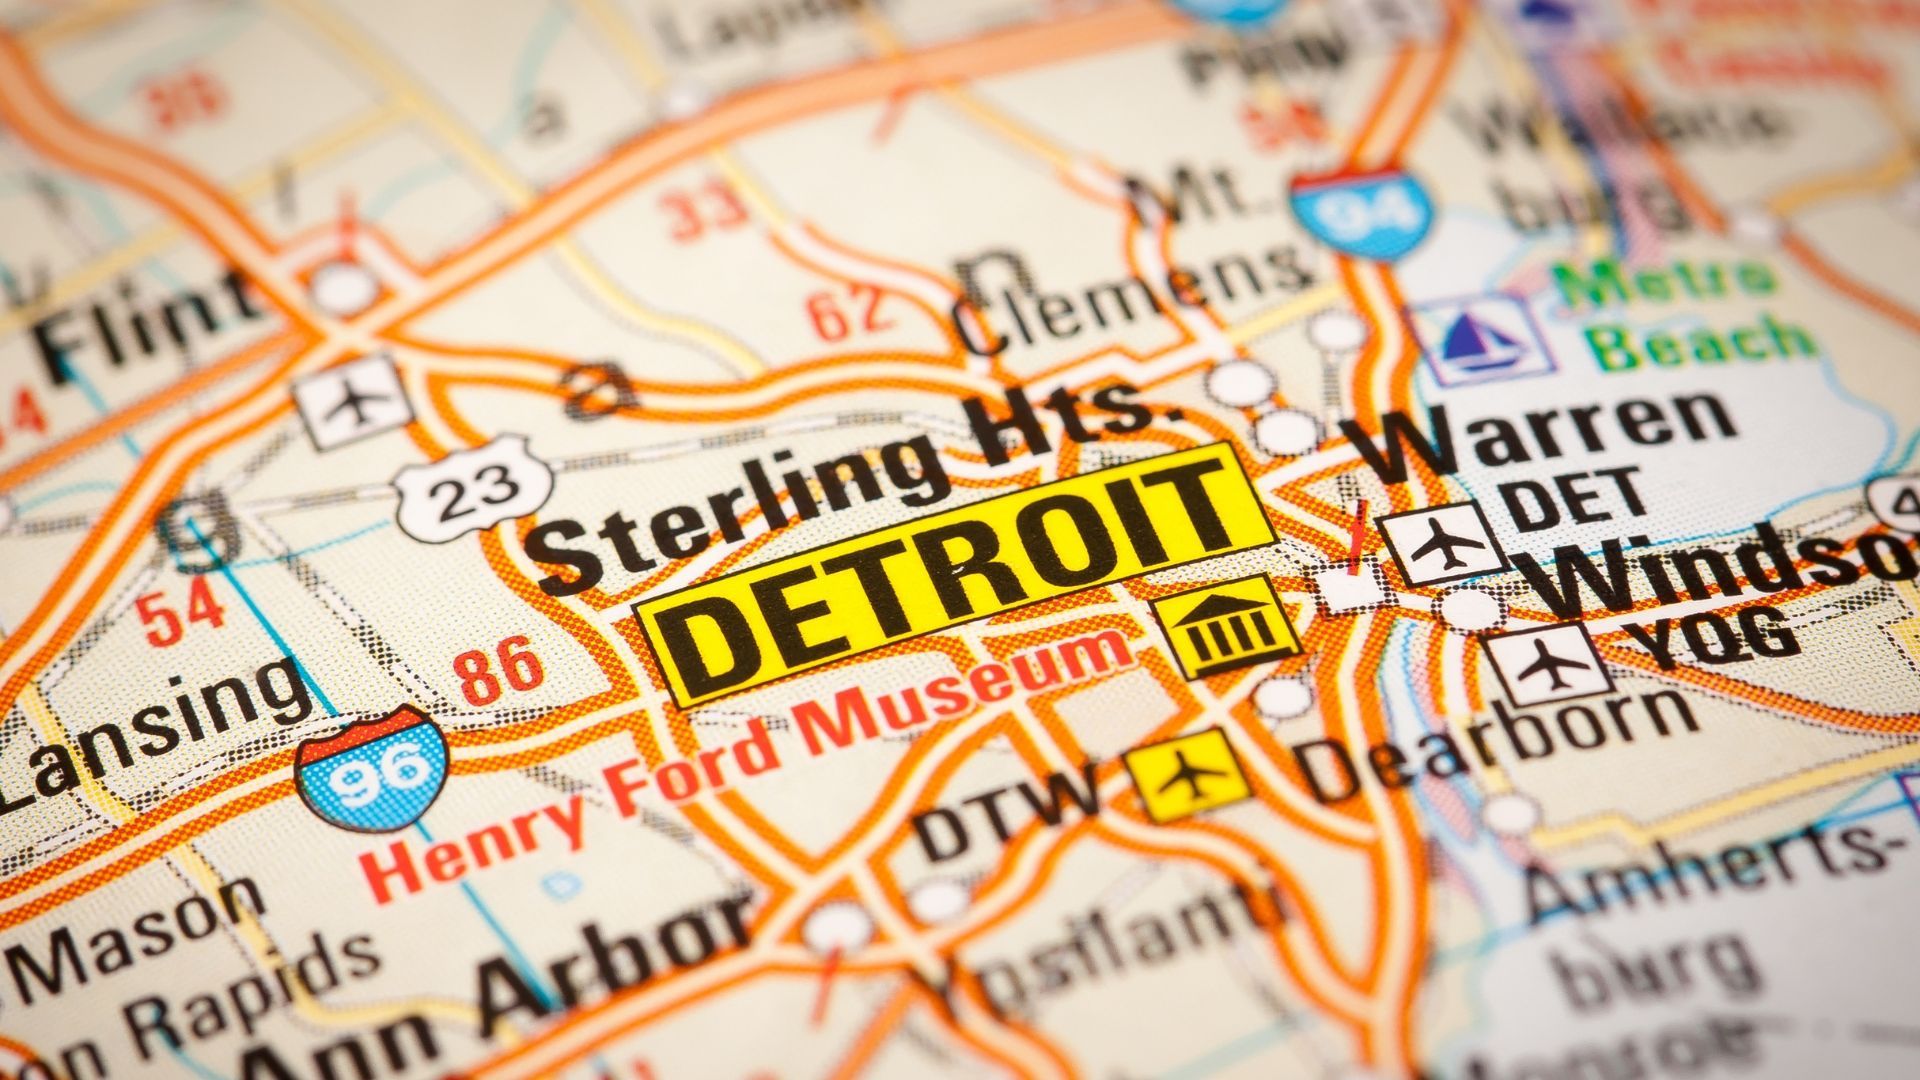 a close up of a map showing the location of detroit